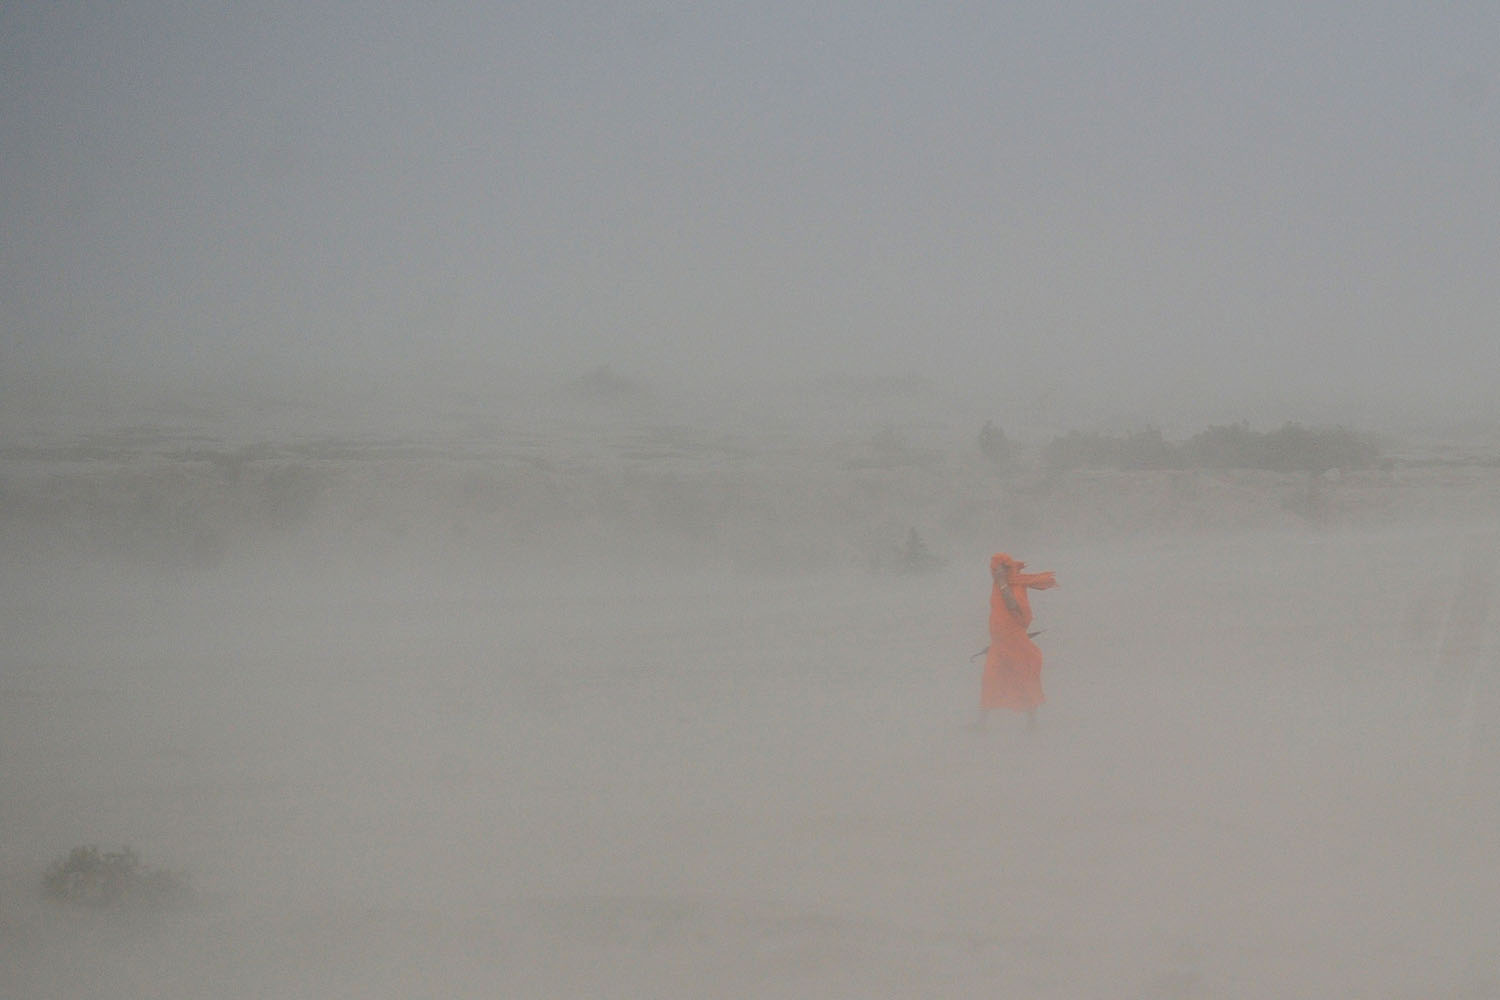 INDIA-WEATHER-DUST STORM